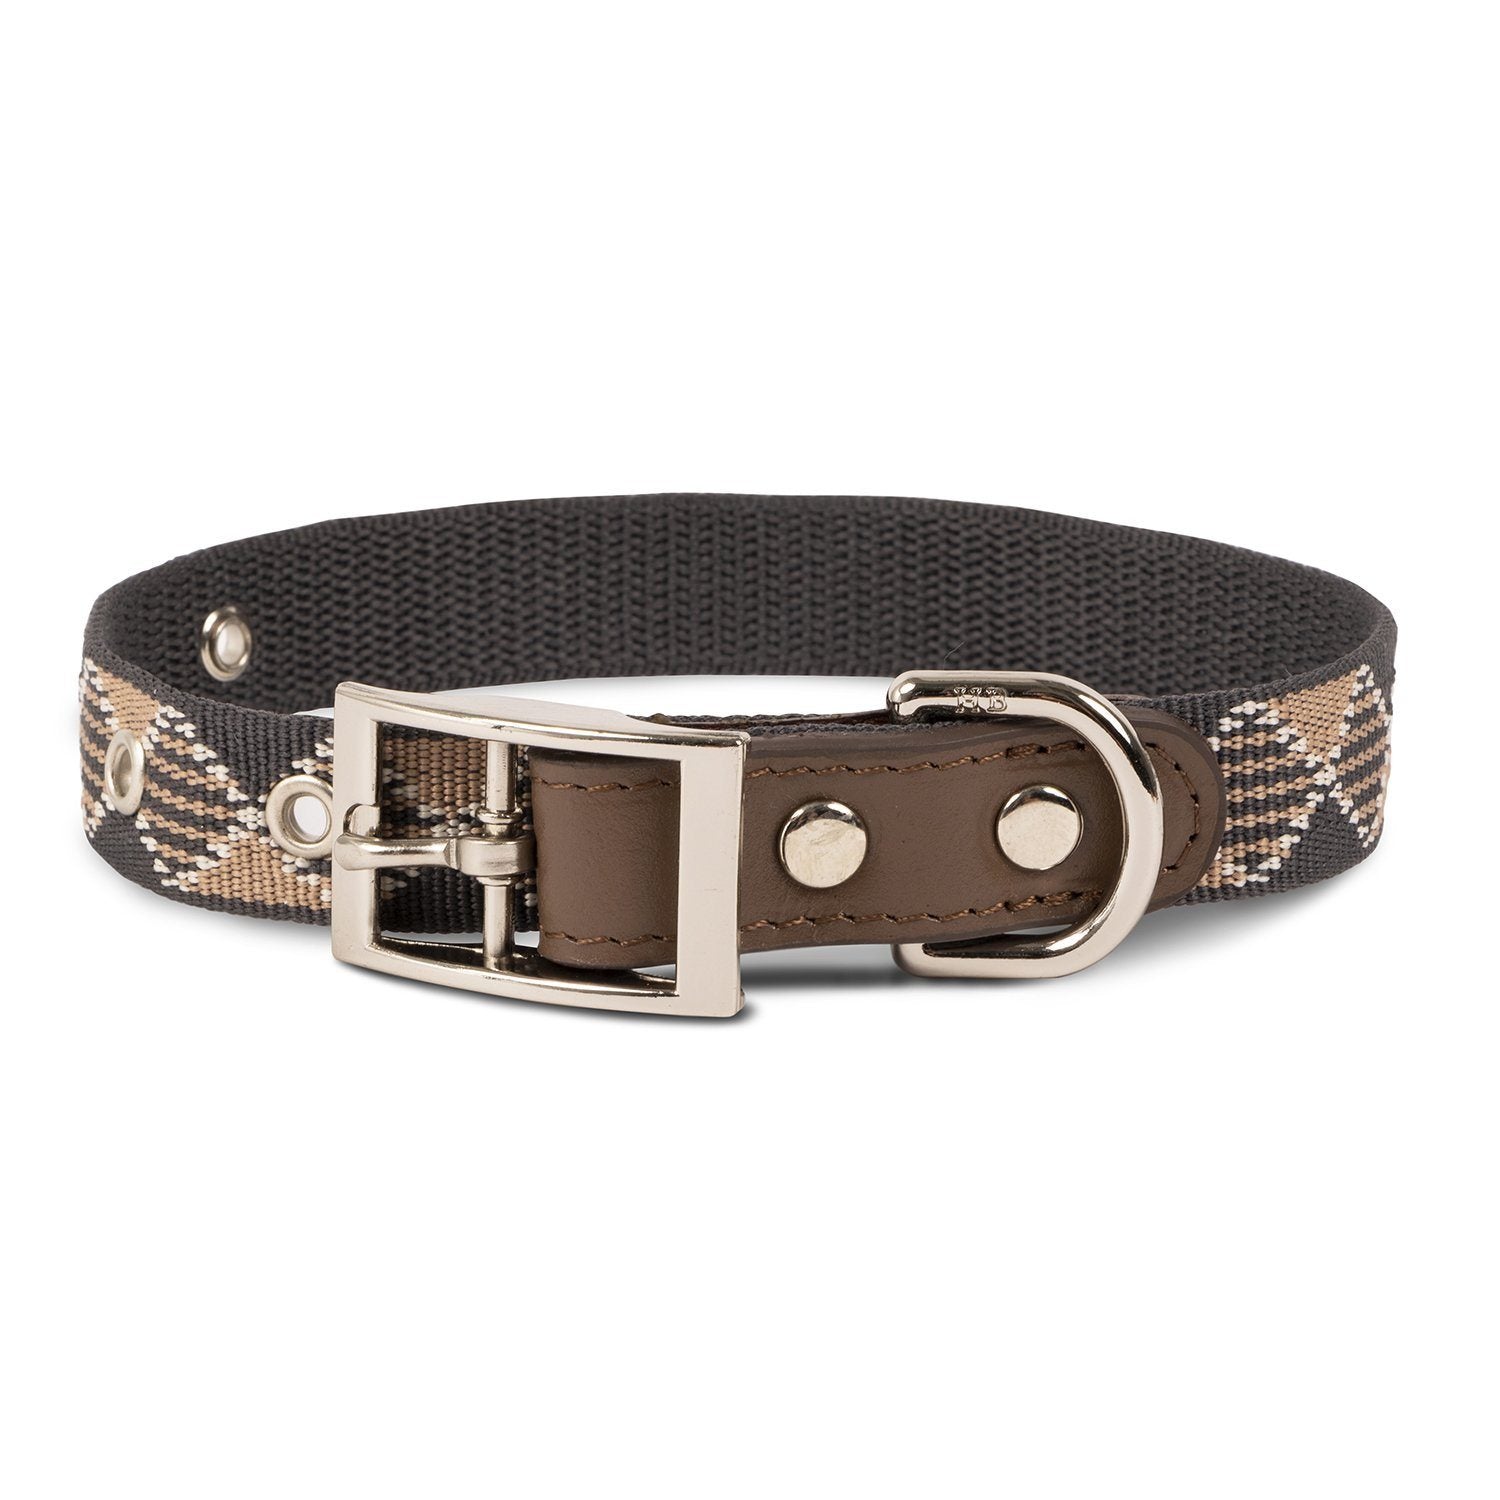 Authentic Louis Vuitton dog collar from japan